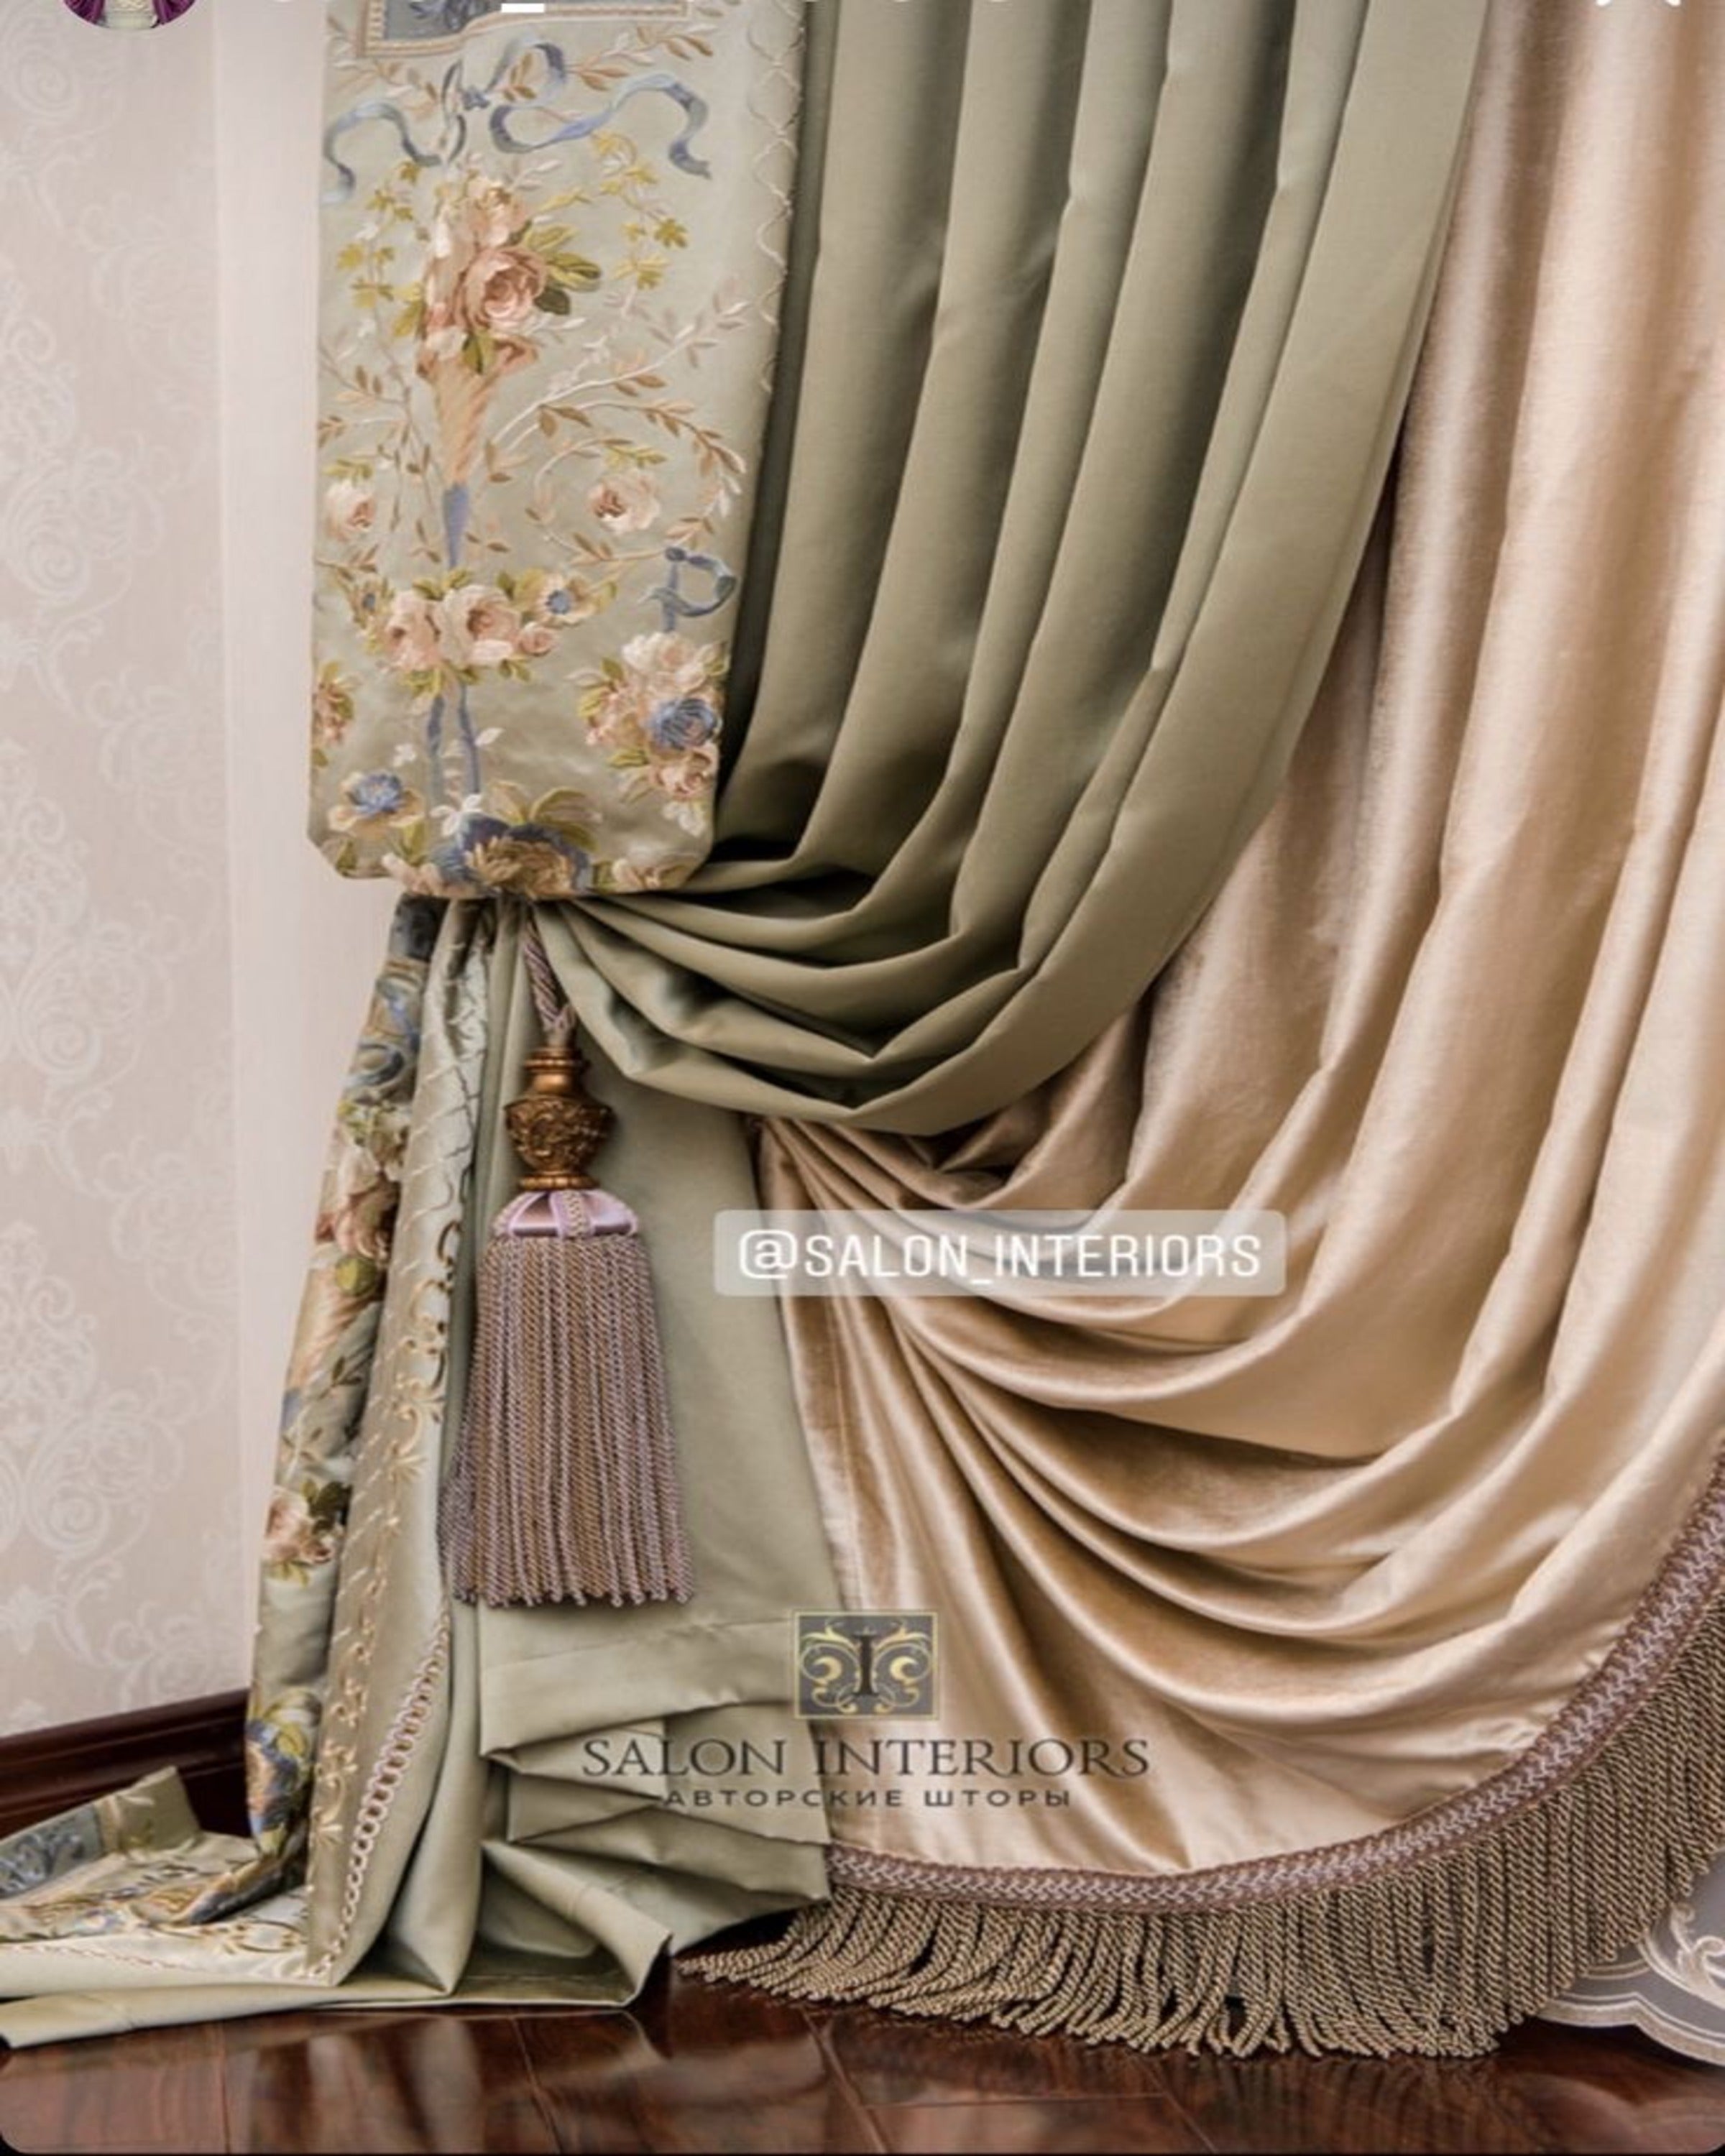 Star Curtain ANGIE HOMES